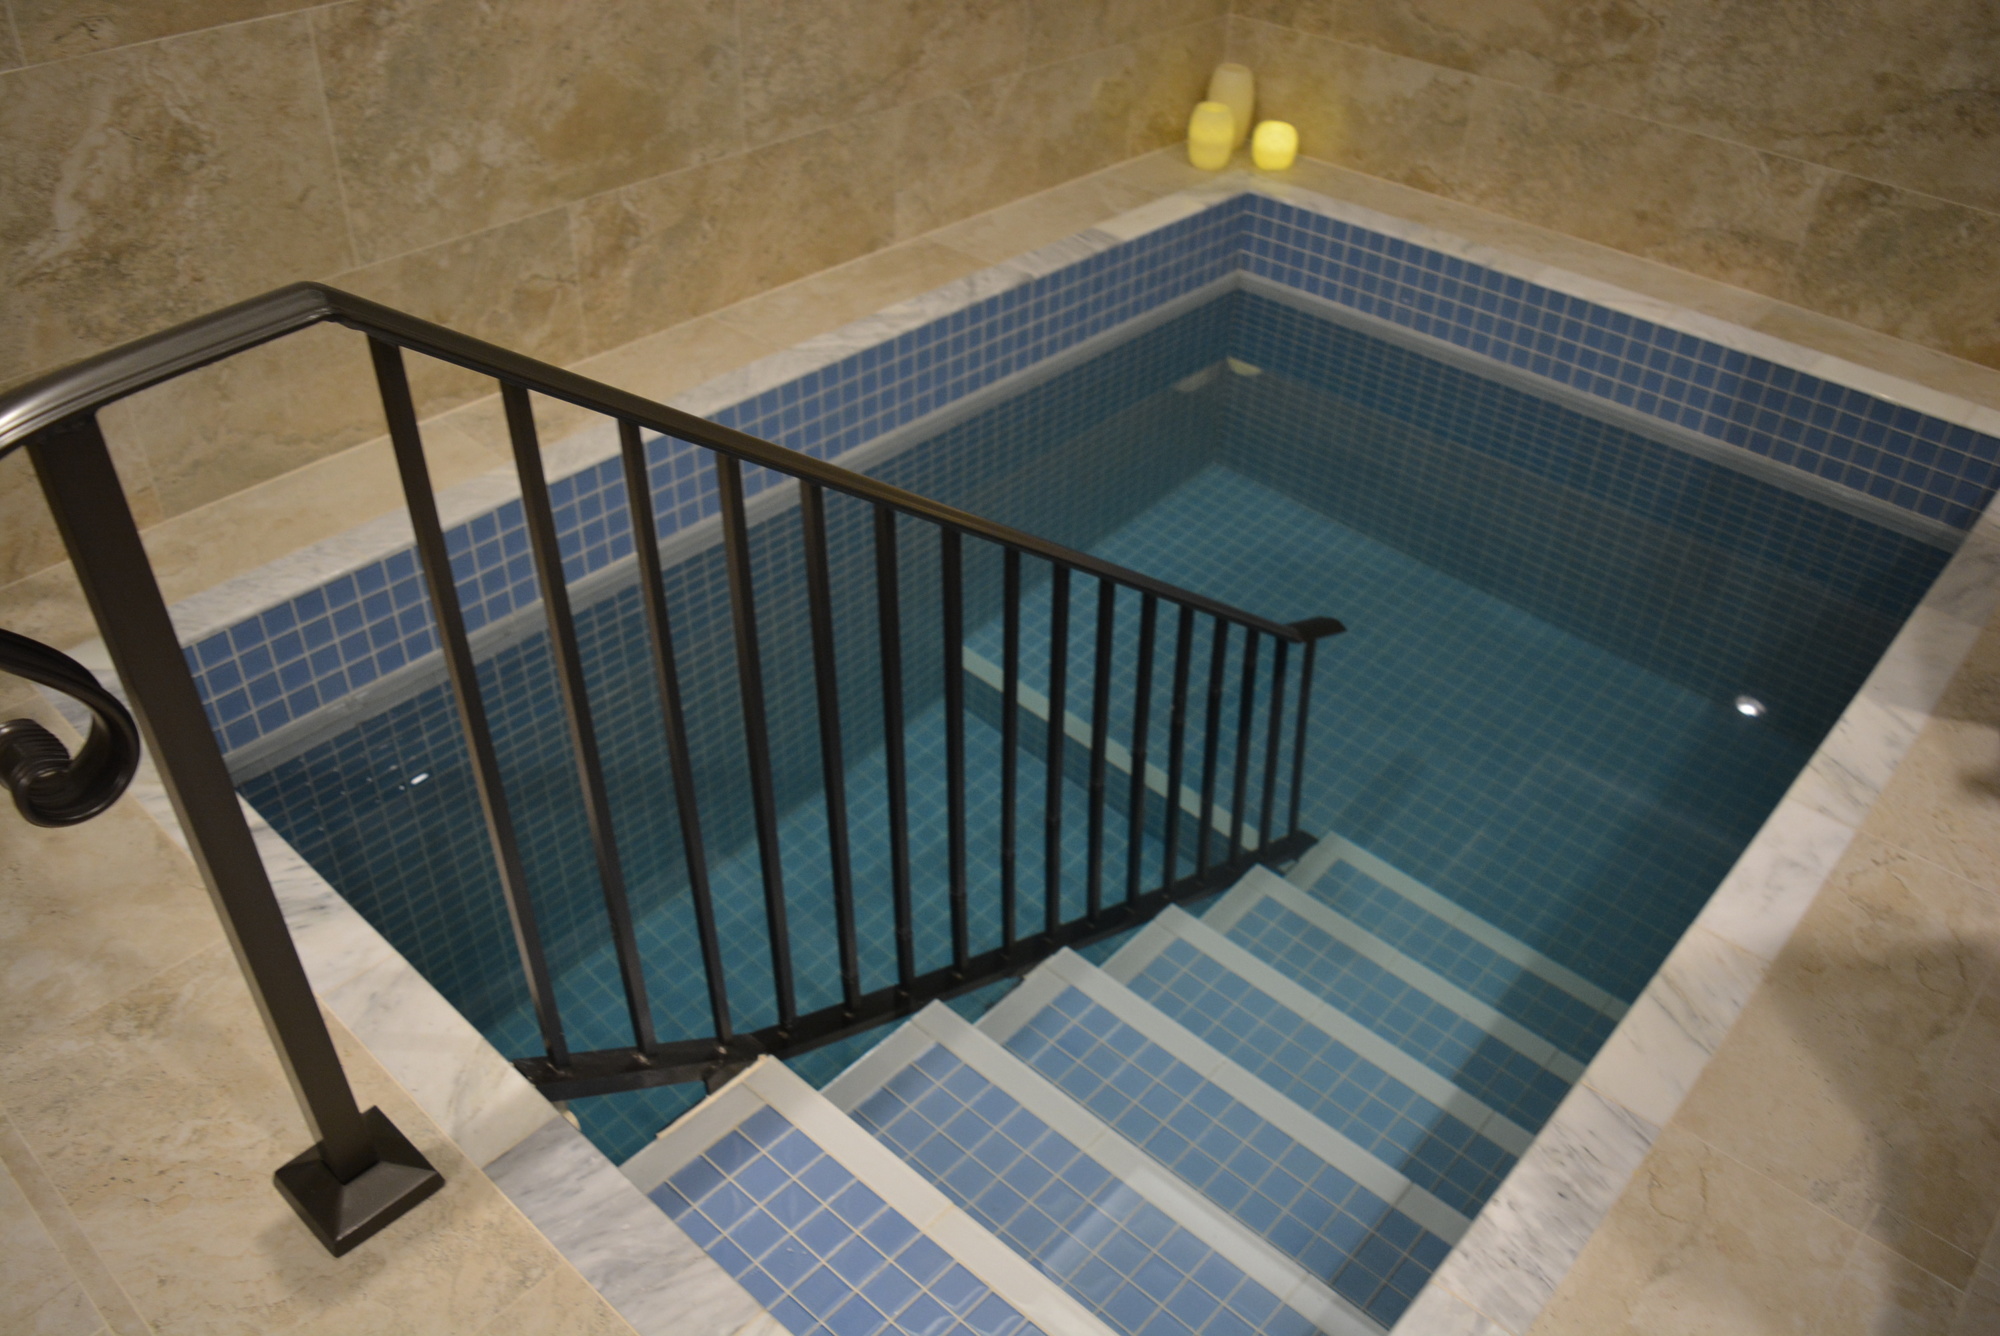 The mikvah is a ceremonial bath for  women. In accordance with Judaism, the mikvah must hold at least 200 gallons of natural water so this one is designed with rainwater in a separate pool below the chlorinated one used by guests.